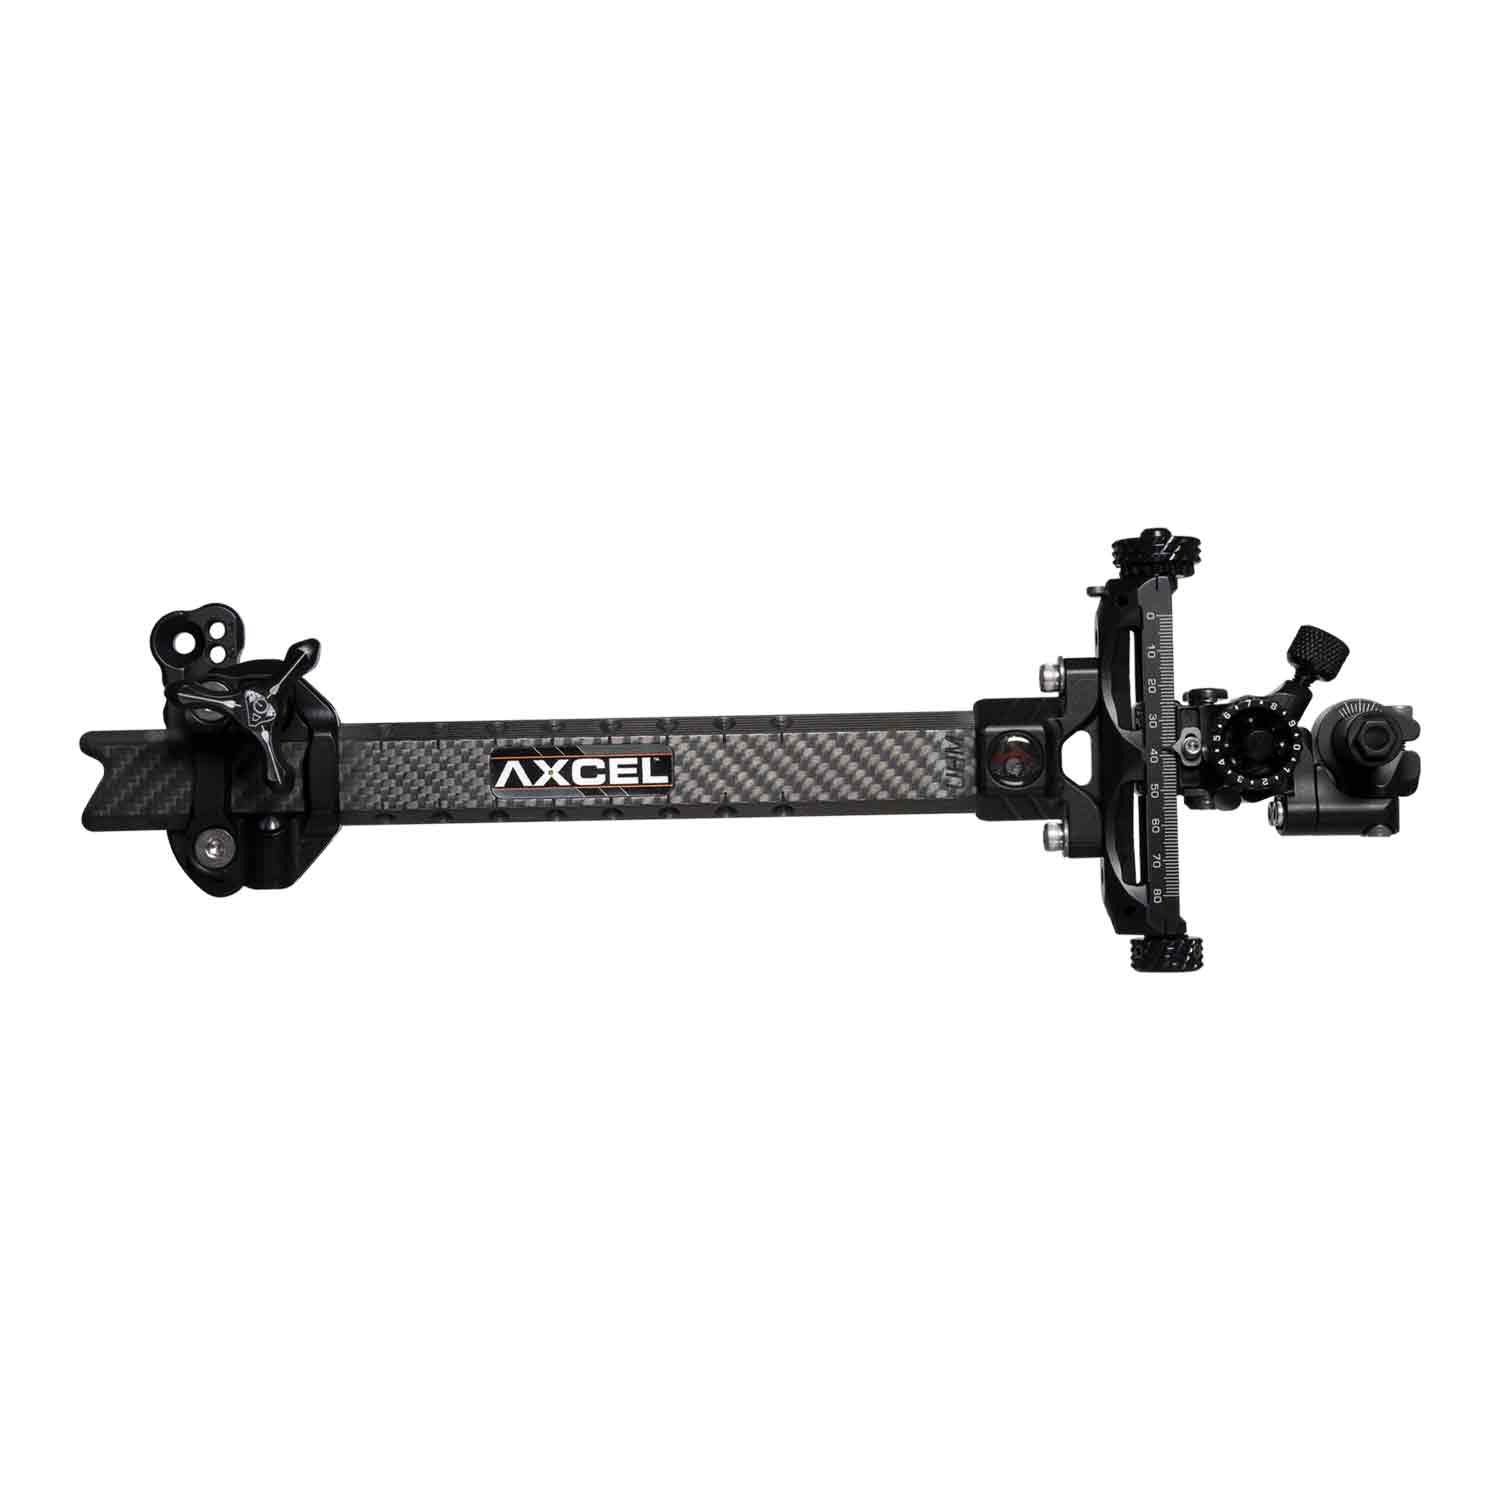 Axcel Achieve XP Variable Range Compound Target Sight (1.5